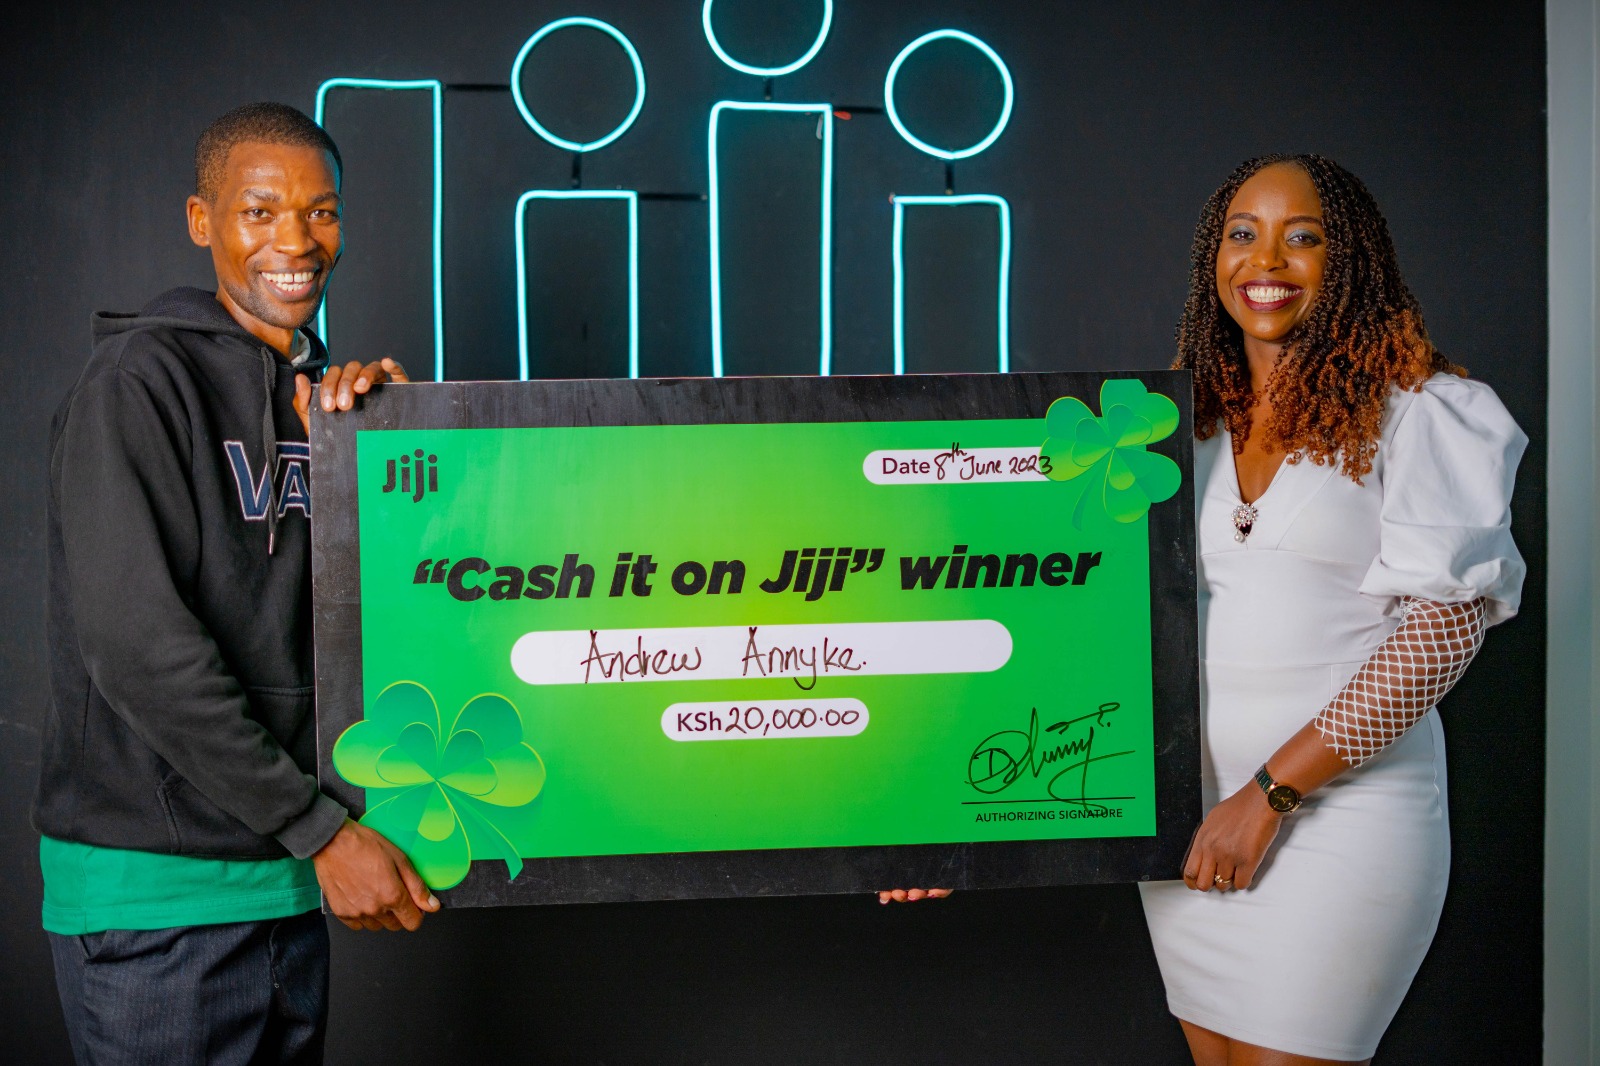 Cash it on Jiji Campaign Launched to transform second-hand economy